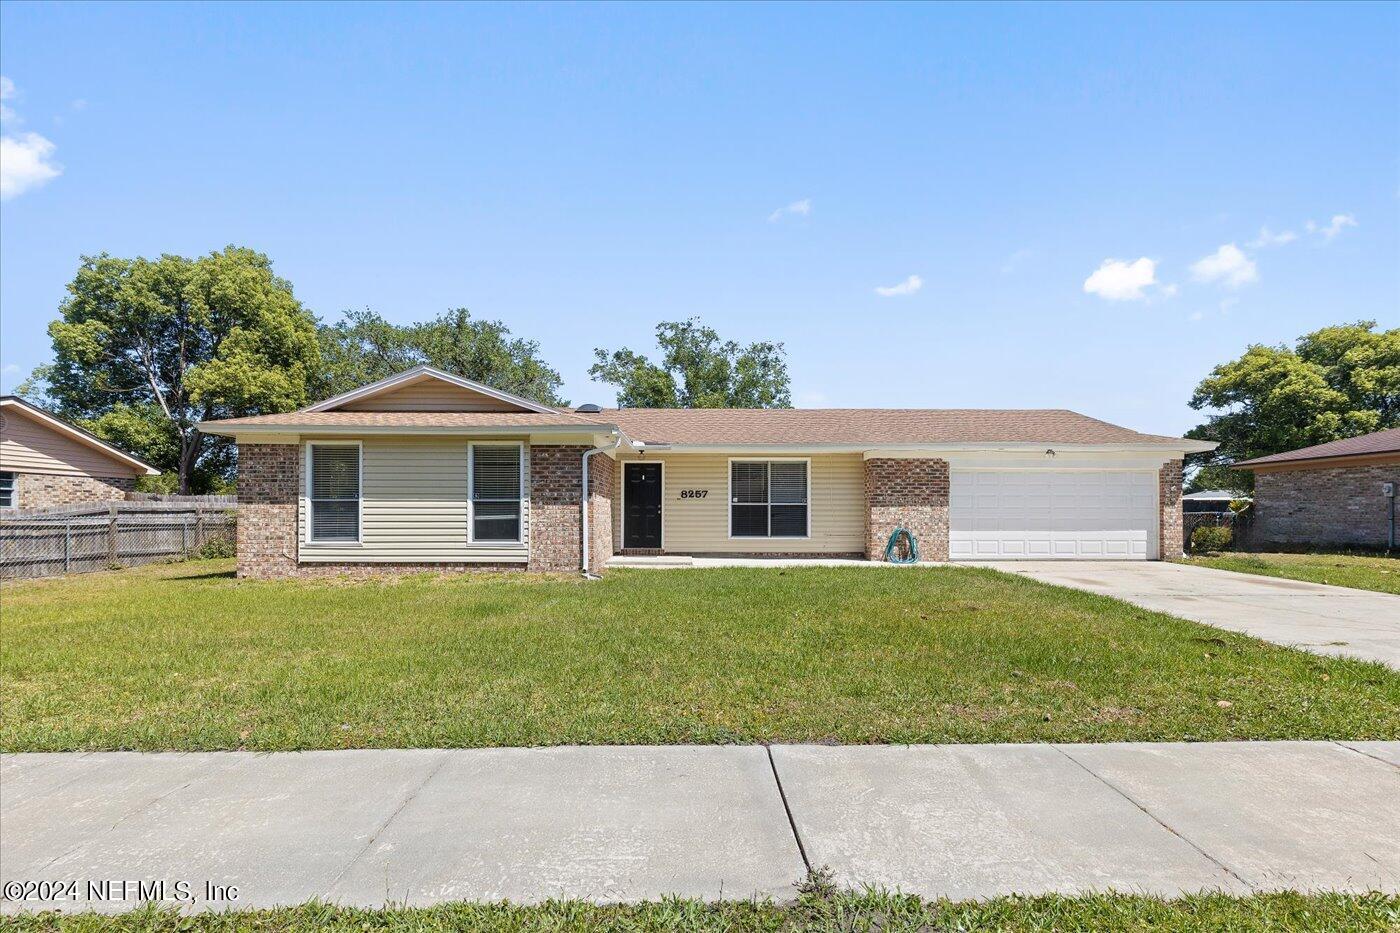 Jacksonville, FL home for sale located at 8257 Blazing Star Road, Jacksonville, FL 32210